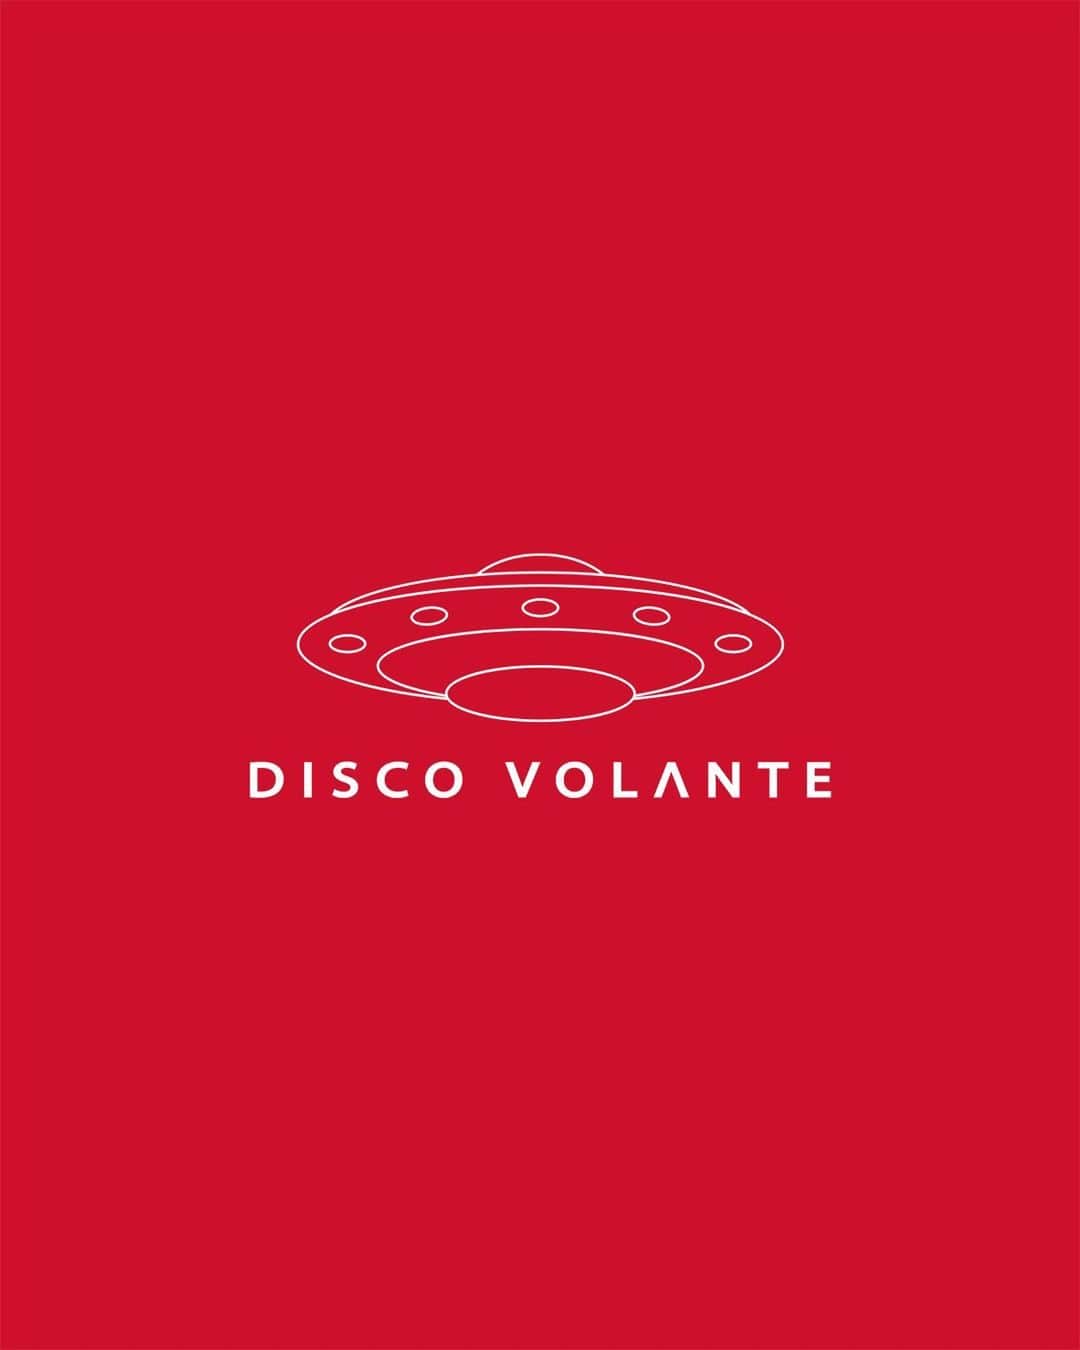 KLASSE14のインスタグラム：「Get in, we’re going for drive through space and time. ⁠⁠ ⁠⁠ The Disco Volante takes inspiration from the flying saucers in the 50s, taking you back in time with its vintage look-and-feel.⁠⁠ ⁠⁠ Embrace the New Year with a new timepiece. Free shipping universe-wide. Discover more through link in bio. ⁠⁠ ⁠⁠ #klasse14 #oridinarilyunique」